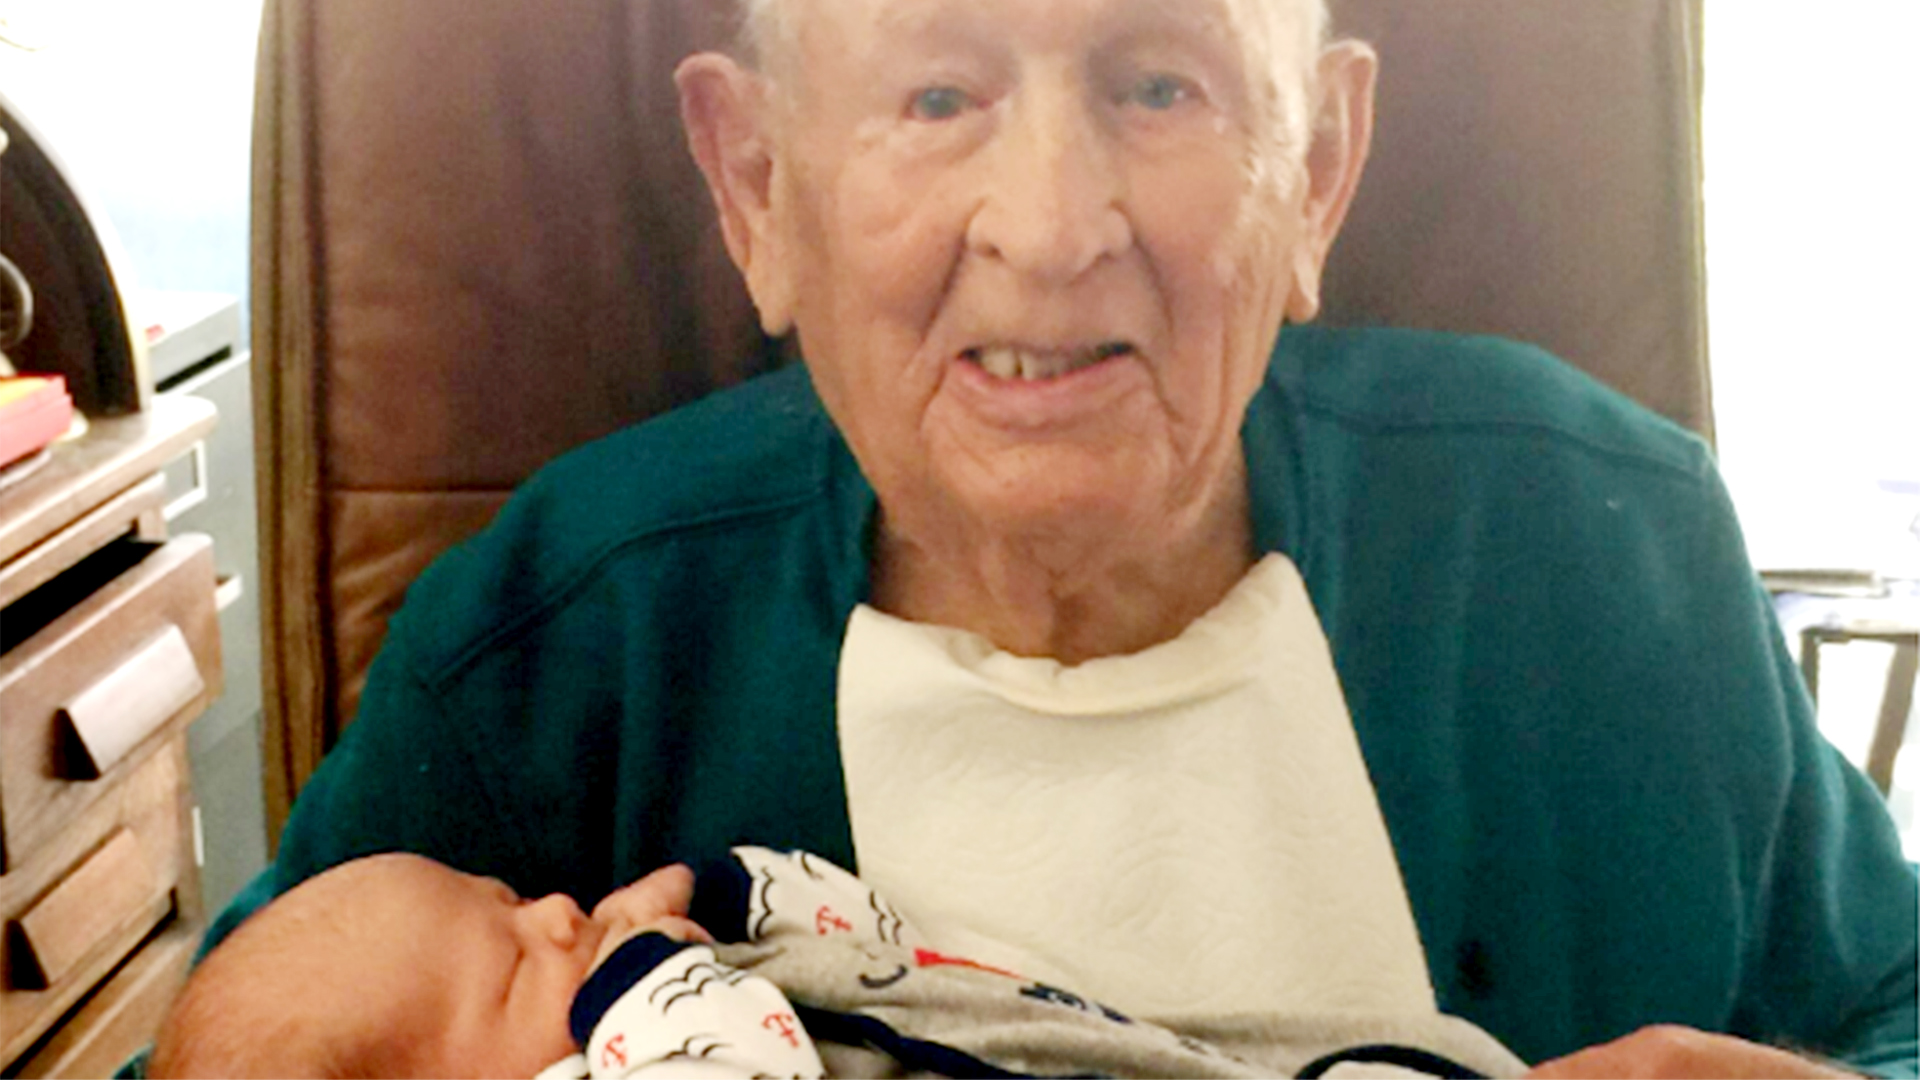 105-year-old man meets great-grandson: 'He's so in love' - TODAY.com